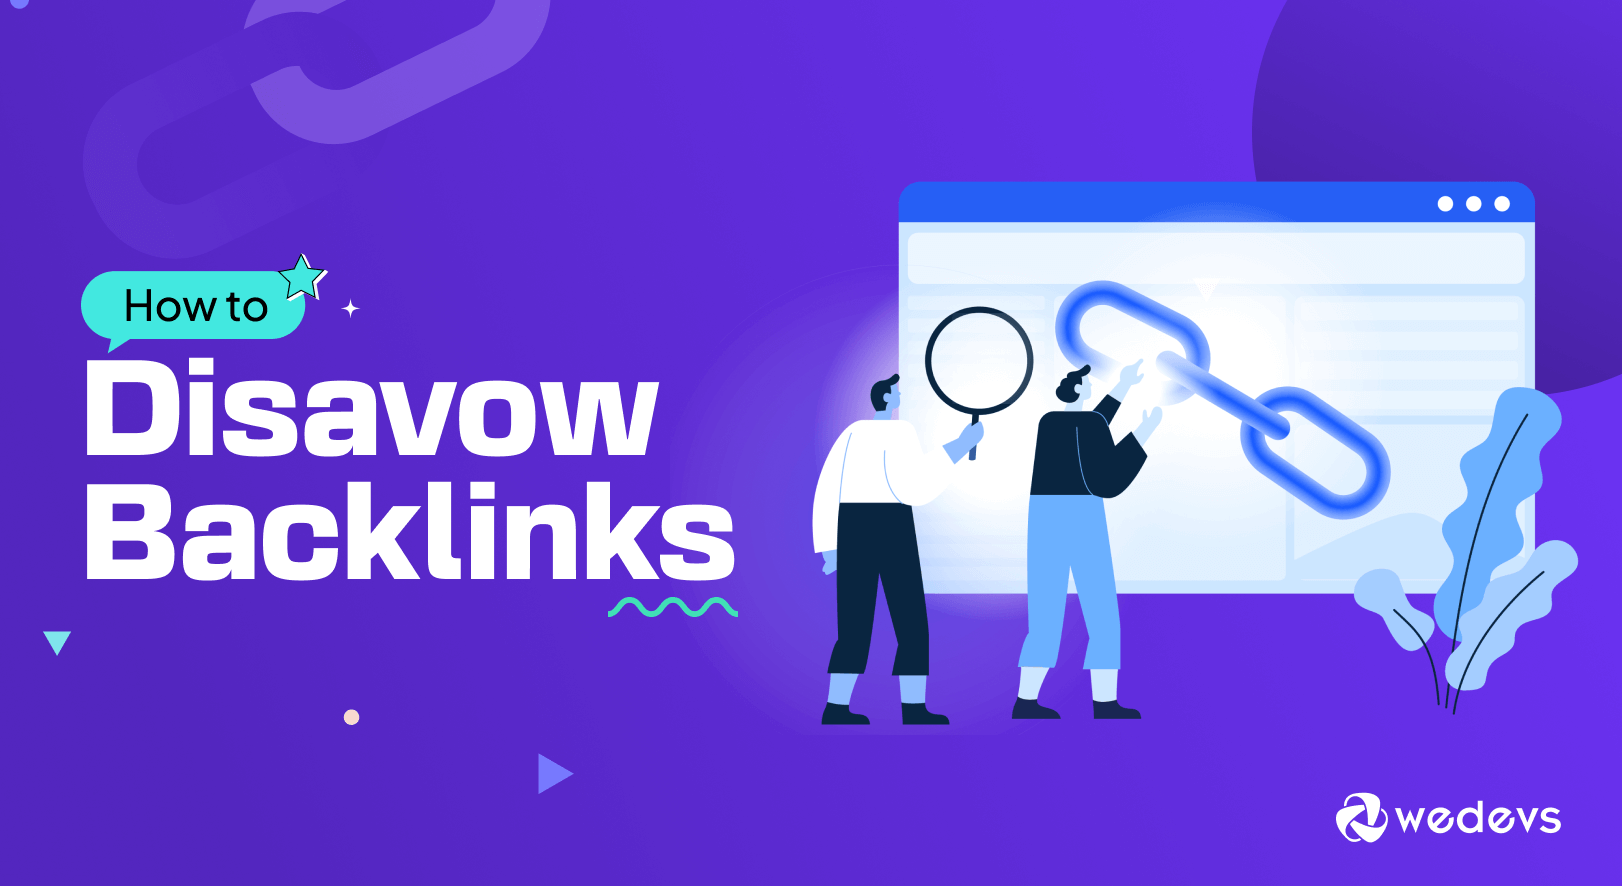 How to Disavow Backlinks: A Step-by-Step Tutorial for Beginners